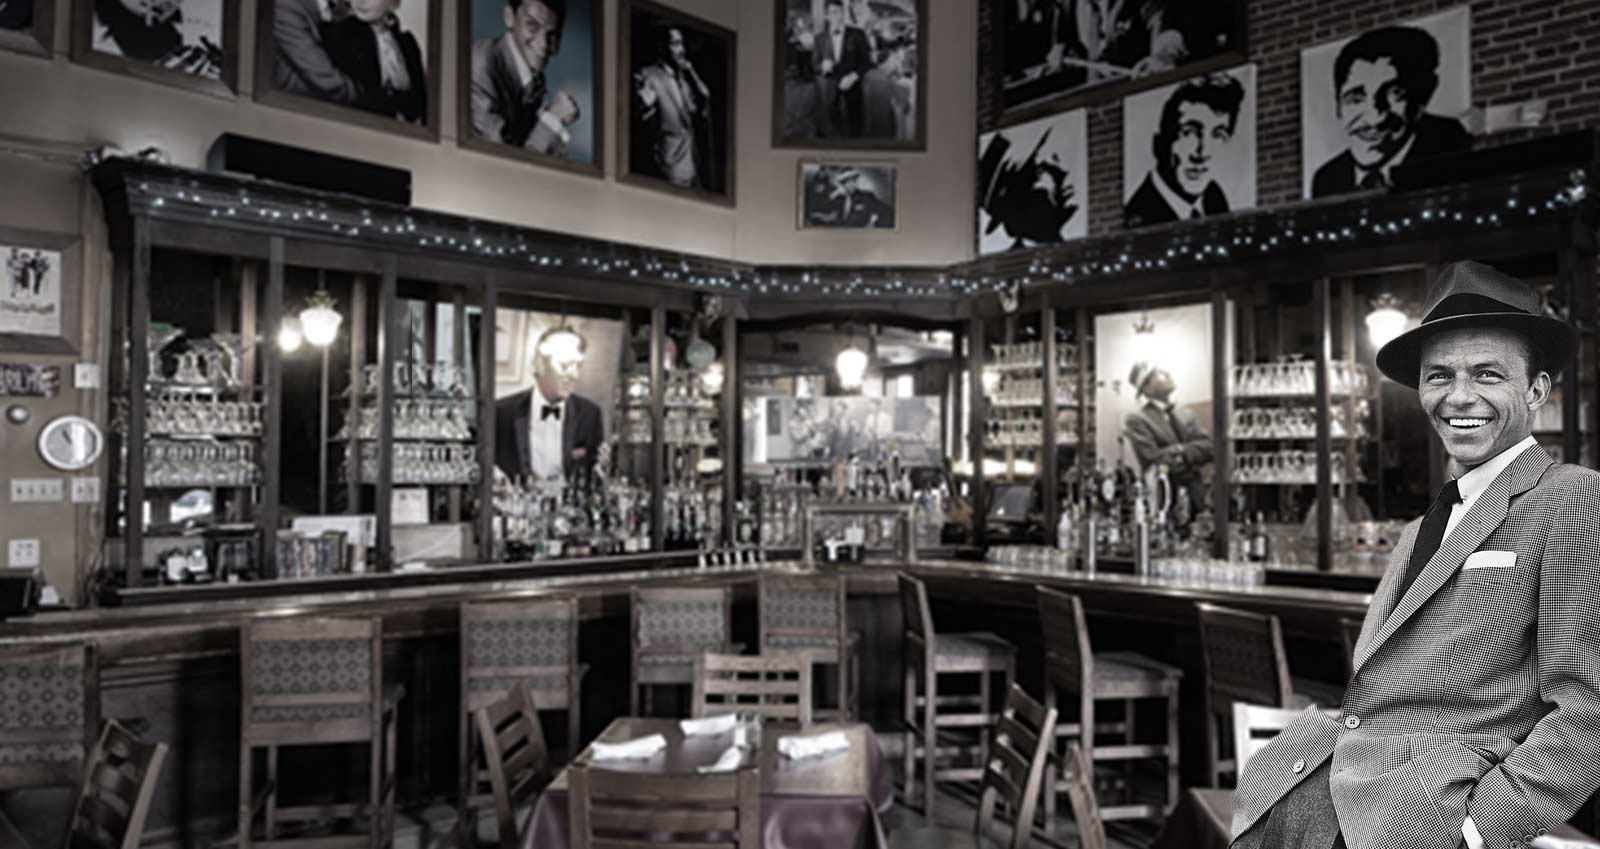 Supano's Steakhouse, Seafood & Italian pasta is a Frank Sinatra themed Baltimore Steakhouse featuring a jumbo screen and live music. We are located near the Baltimore Inner Harbor.